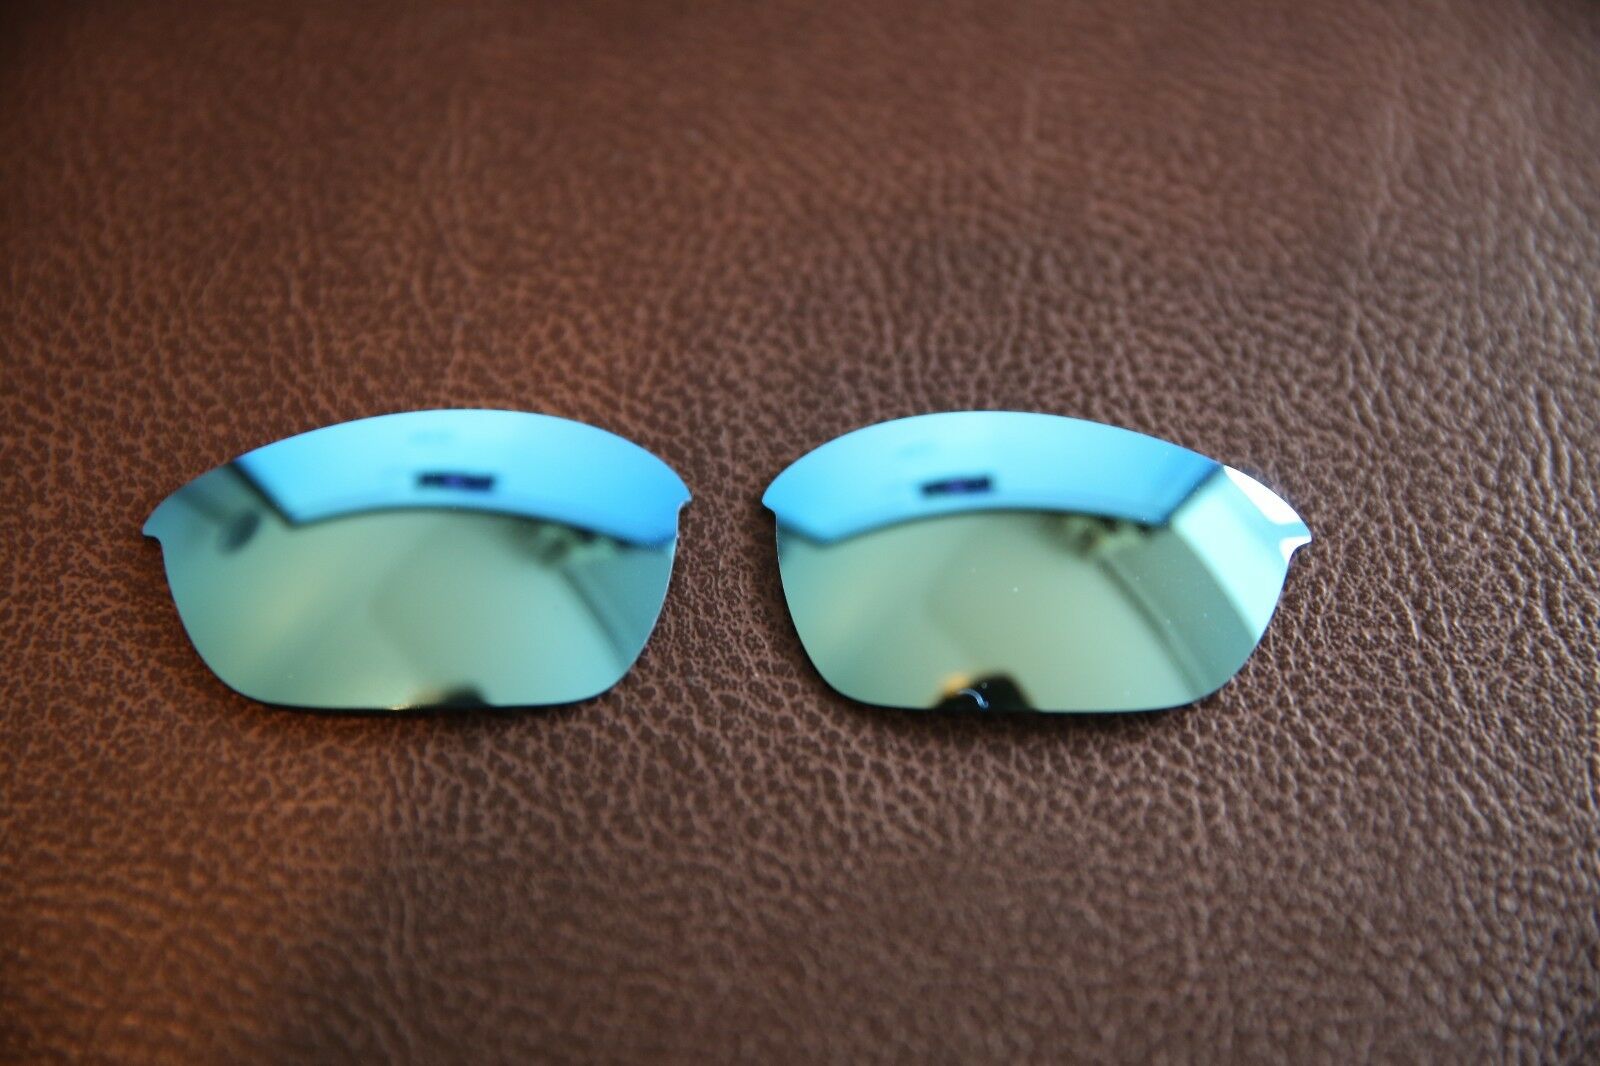 PolarLens POLARIZED Ice Blue Replacement Lens for-Oakley Half Jacket 2.0